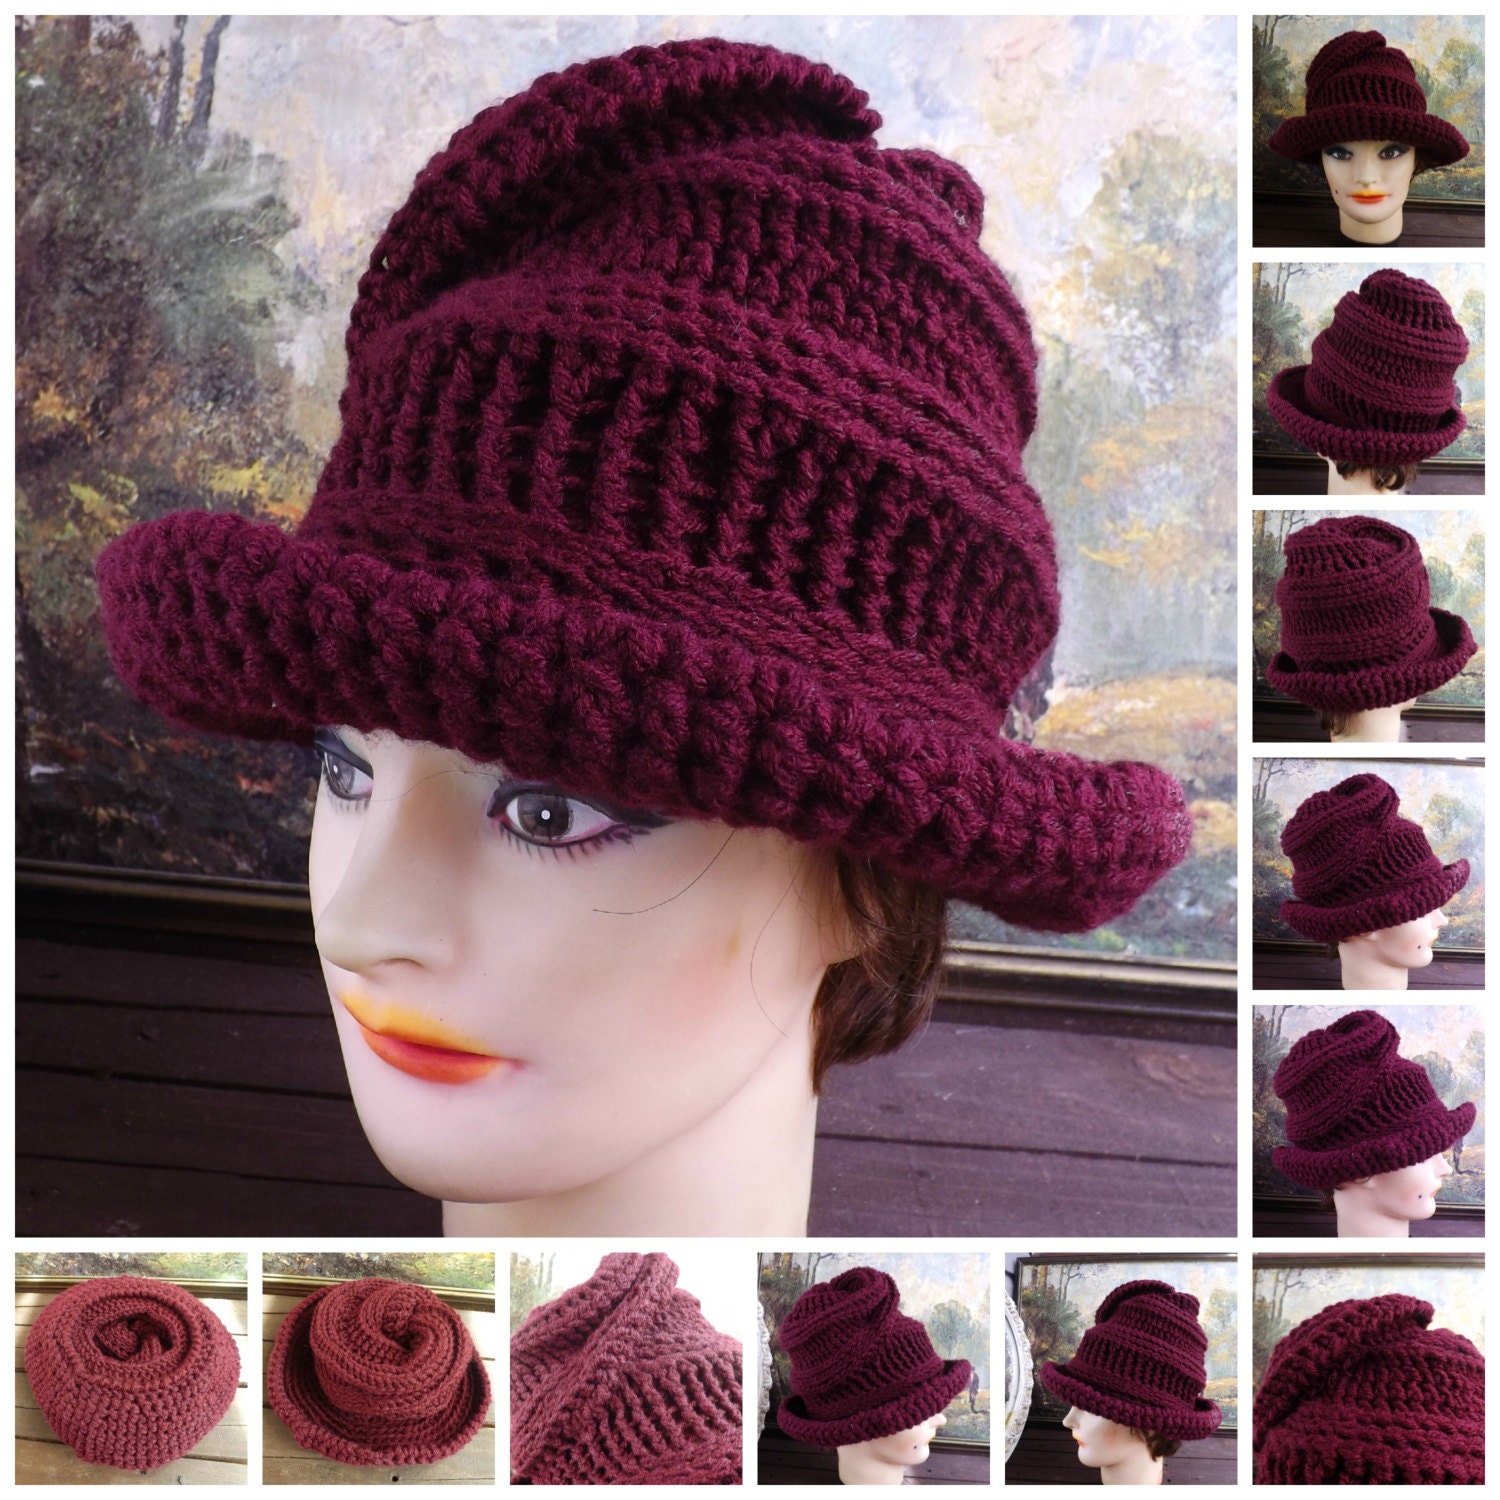 unique-etsy-crochet-and-knit-hats-and-patterns-blog-by-strawberry